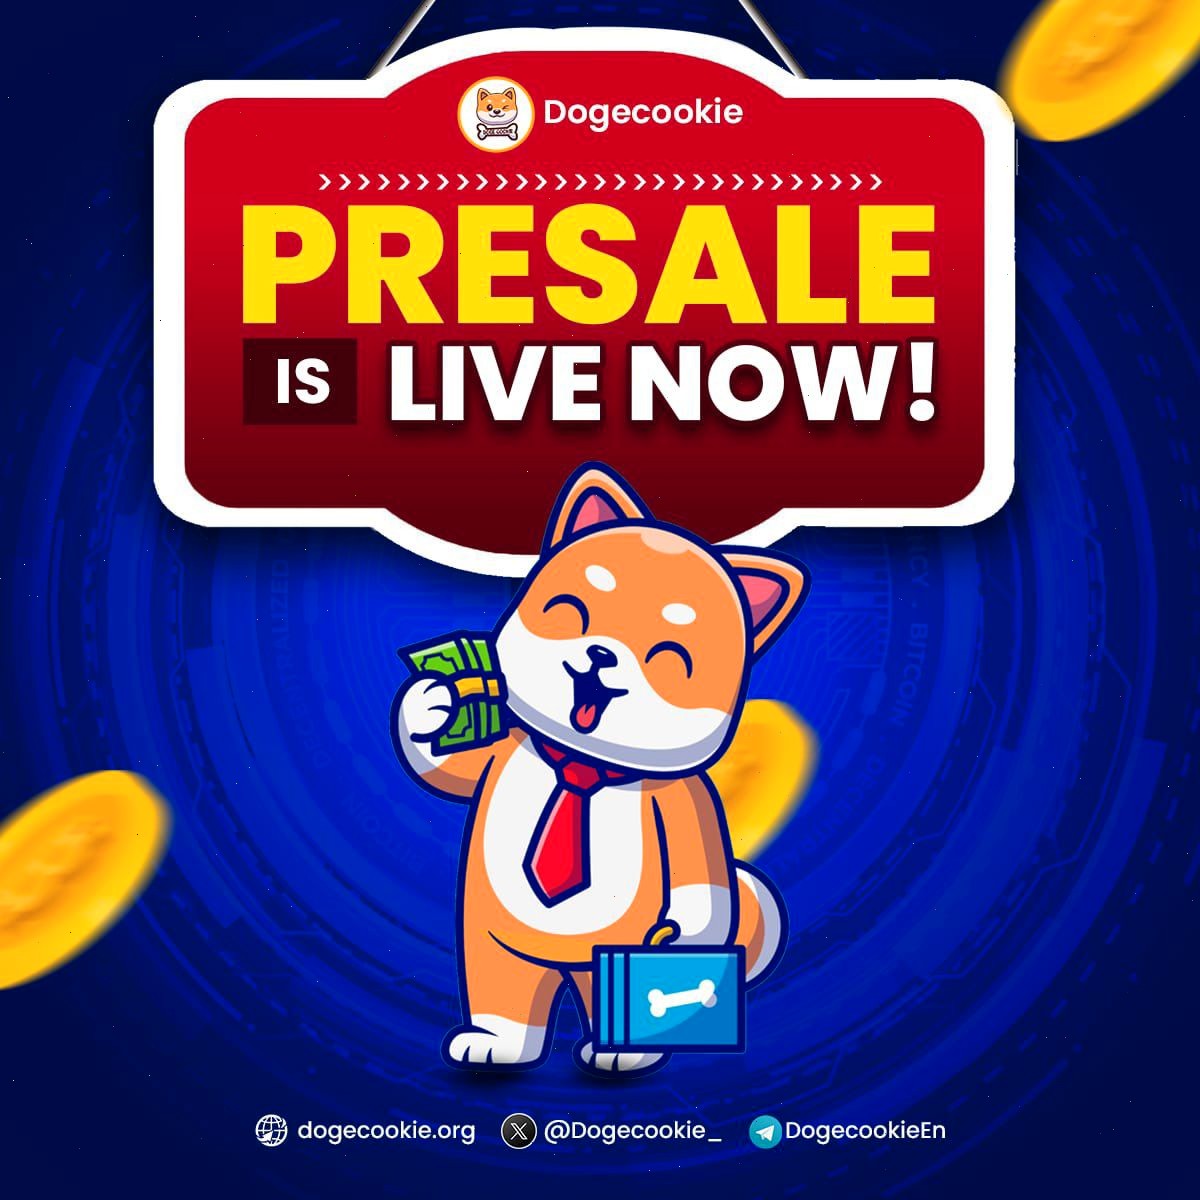 🎉 Breaking News! #DogeCookie 🎉

It's time! 🥳 The #DogeCookie PRESALE IS LIVE! 🚀 Don’t miss out on the yummiest token in the crypto world! 🍪

🔗 gamefi.cm/?DogeCookie

🔹 Get in early!
🔹 Access exclusive bonuses!
🔹 Be part of our sweet community!

Act fast, the presale is